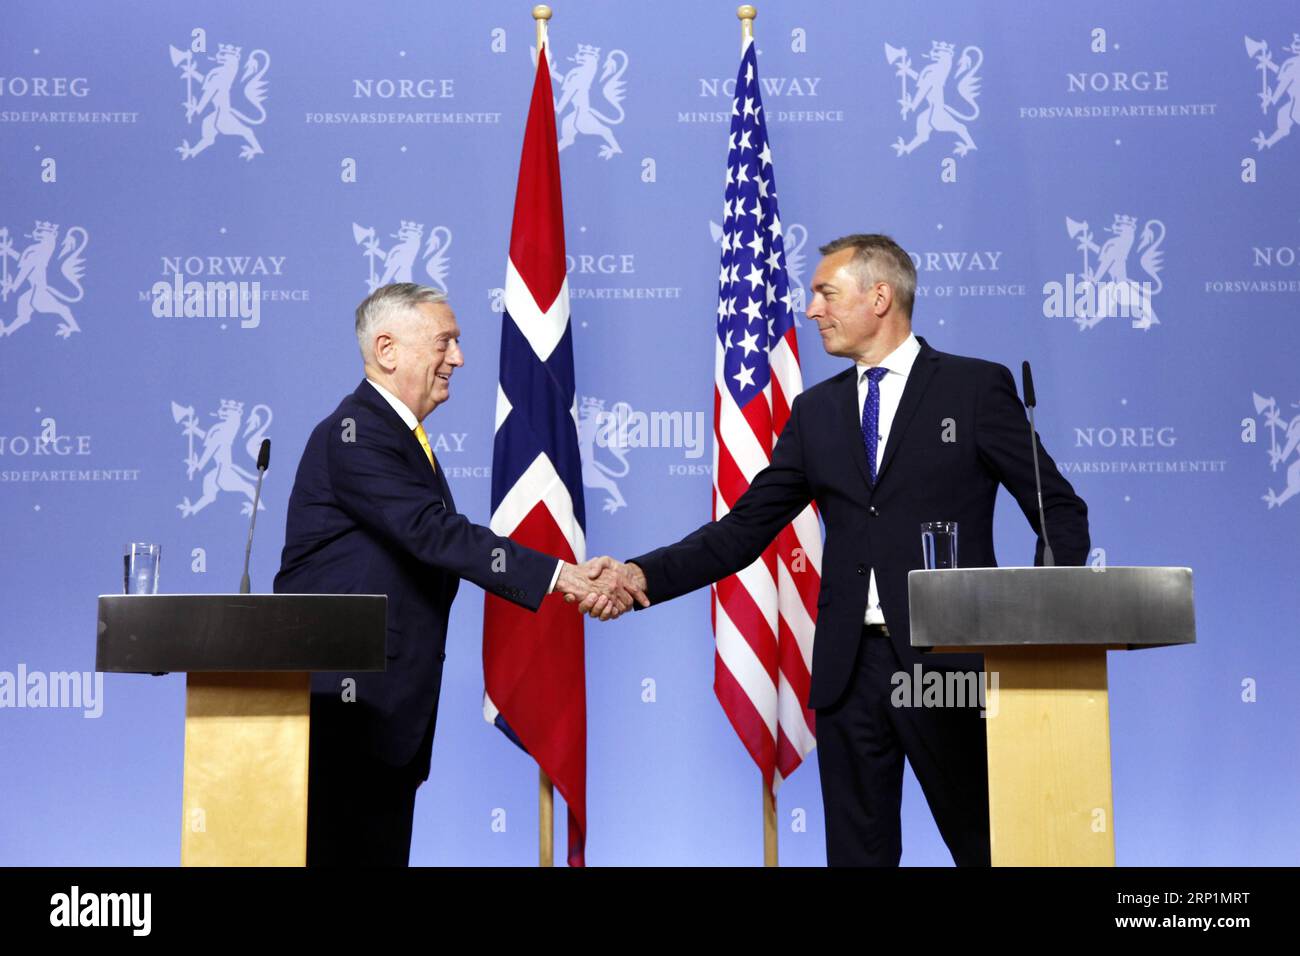 News Themen der Woche KW28 News Themen der Woche News Bilder des Tages (180714) -- OSLO, July 14, 2018 -- U.S. Secretary of Defense James Mattis (L) shakes hands with Norwegian Minister of Defence Frank Bakke-Jensen at a joint press conference in Oslo, Norway, July 14, 2018. Norway on Saturday reconfirmed its commitment to gradually increase defense spending to two percent of GDP in the North Atlantic Treaty Organization (NATO) during a visit by U.S. Secretary of Defense James Mattis to the Nordic country. ) NORWAY-OSLO-U.S.-DEFENSE MINISTER-VISIT LiangxYouchang PUBLICATIONxNOTxINxCHN Stock Photo